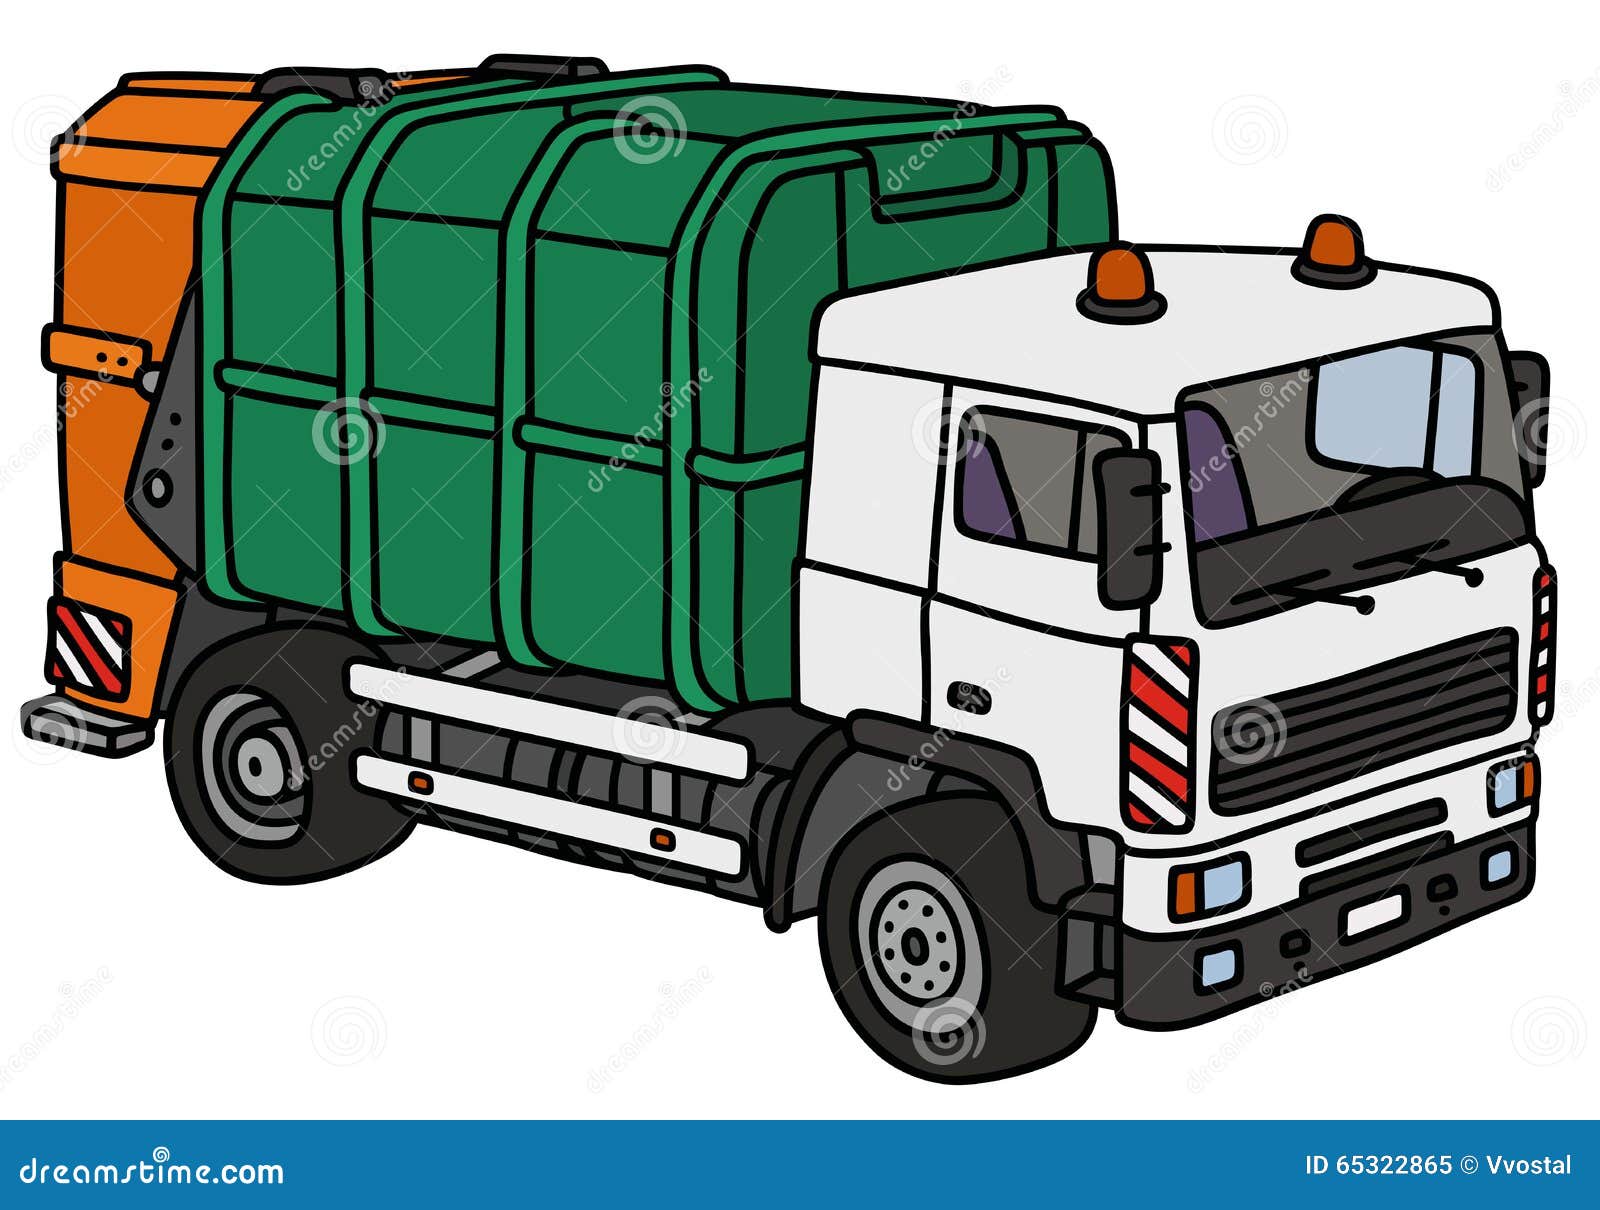 Green and white dustcart stock vector. Illustration of cart - 65322865